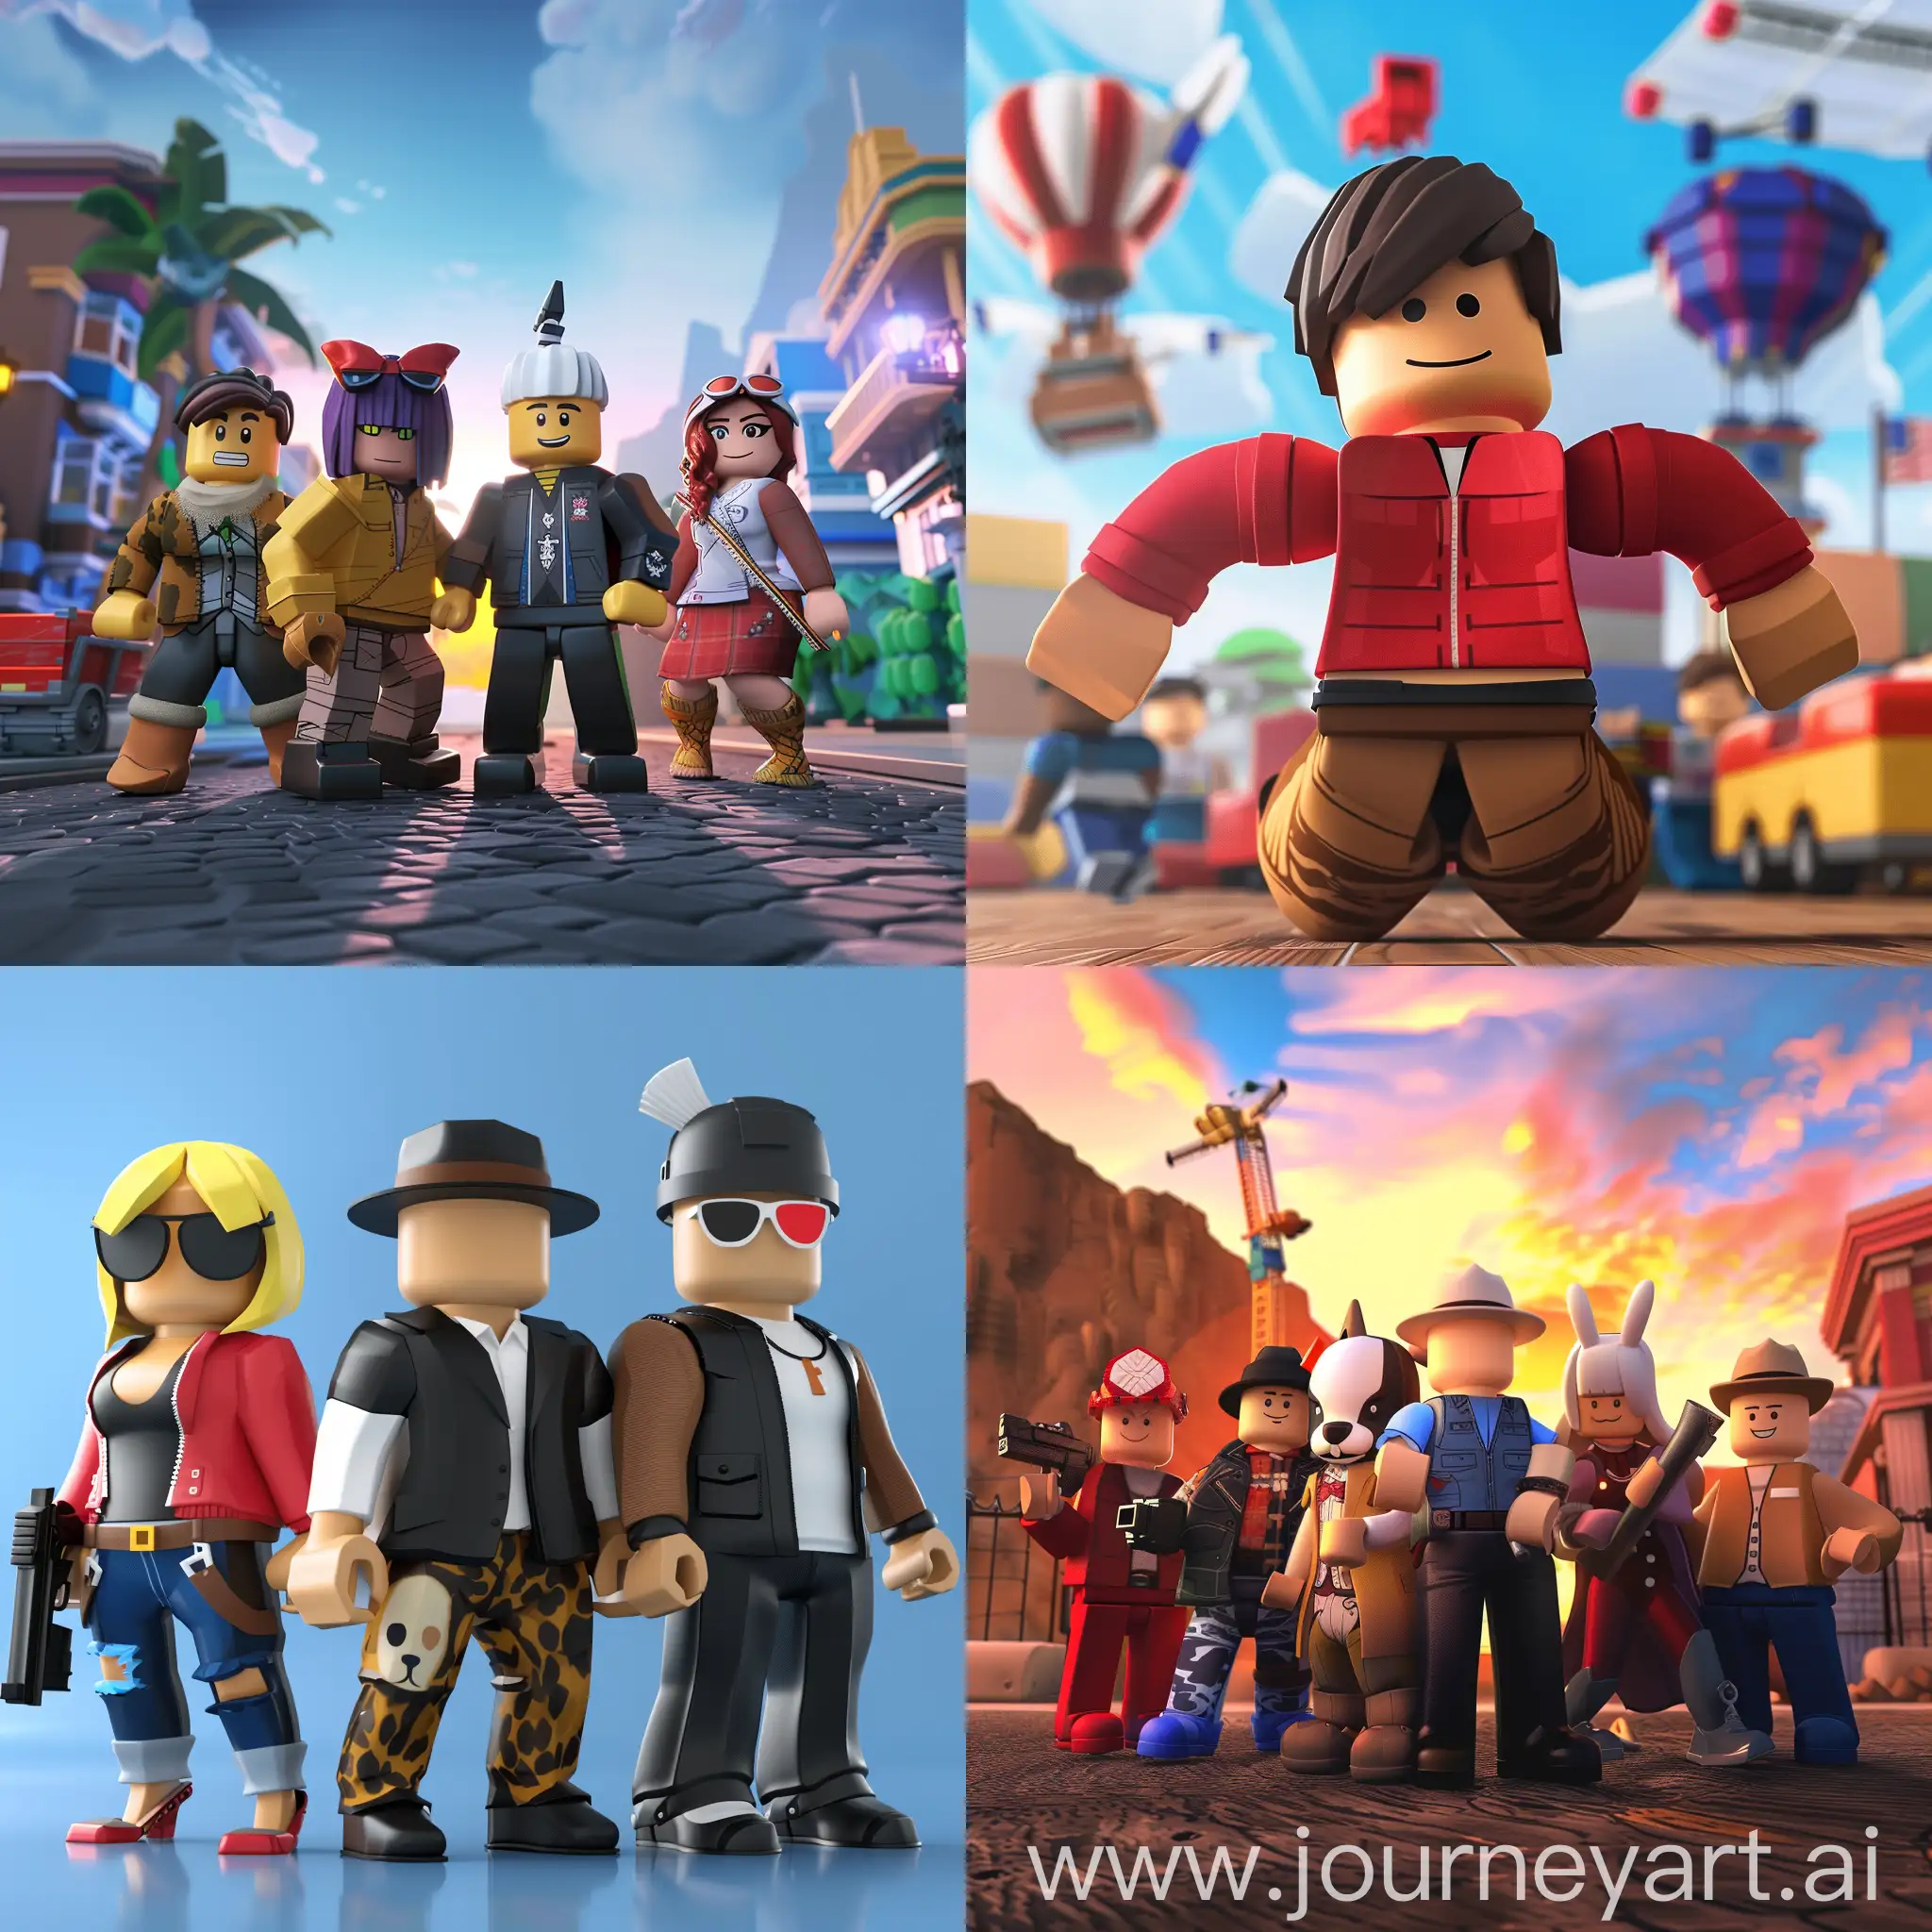 Colorful-Roblox-Avatar-in-a-Virtual-World